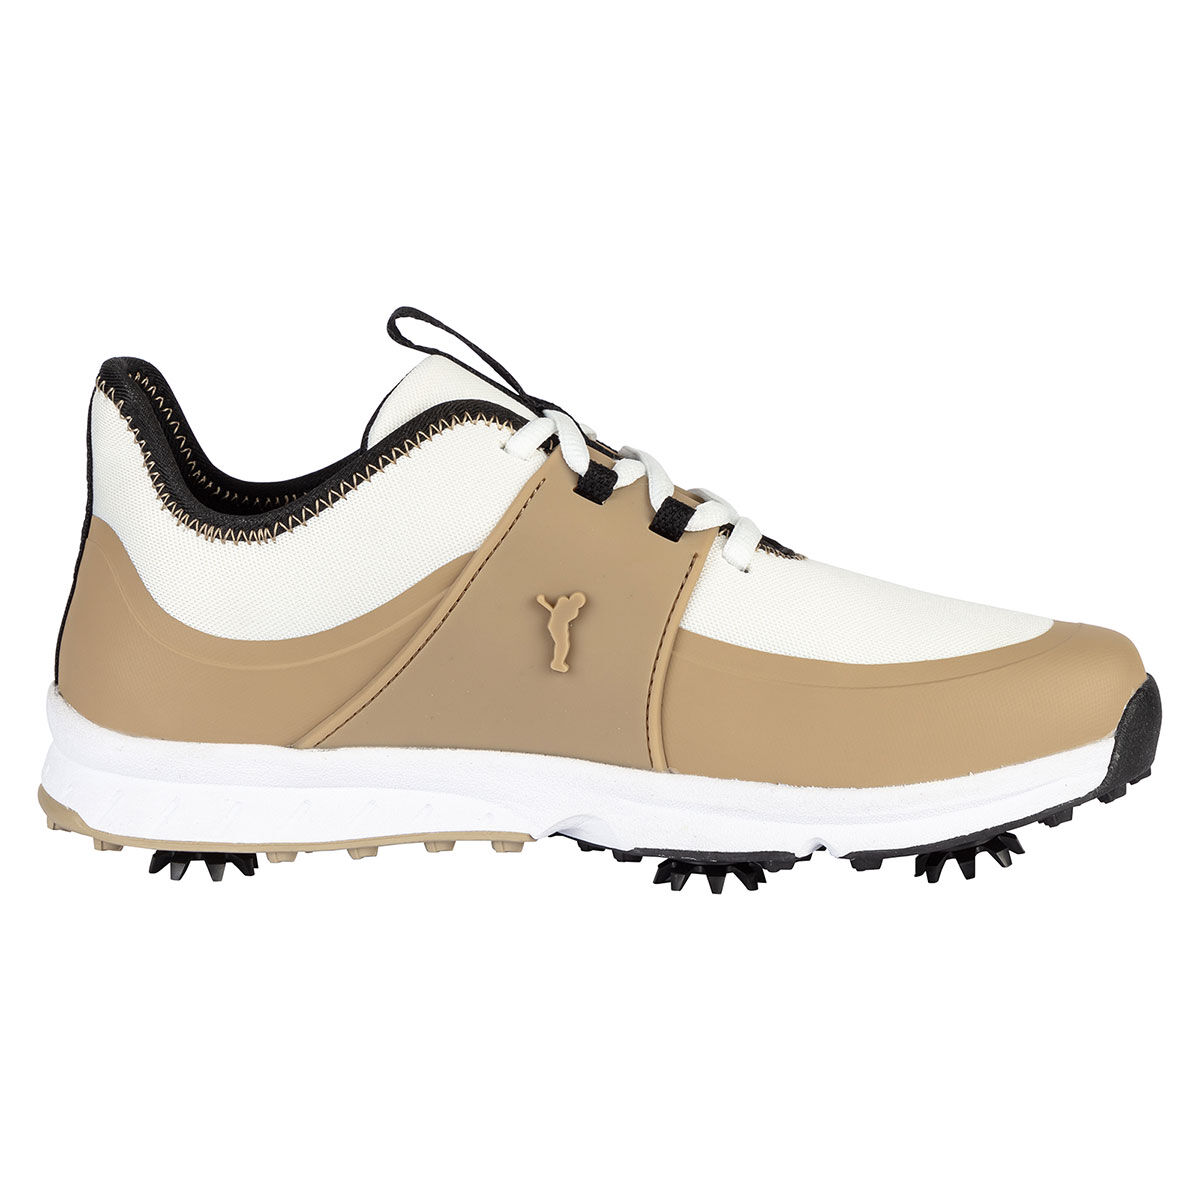 GOLFINO Women’s Beige and White Comfortable Linda Waterproof Spiked Golf Shoes, Size: 4 | American Golf